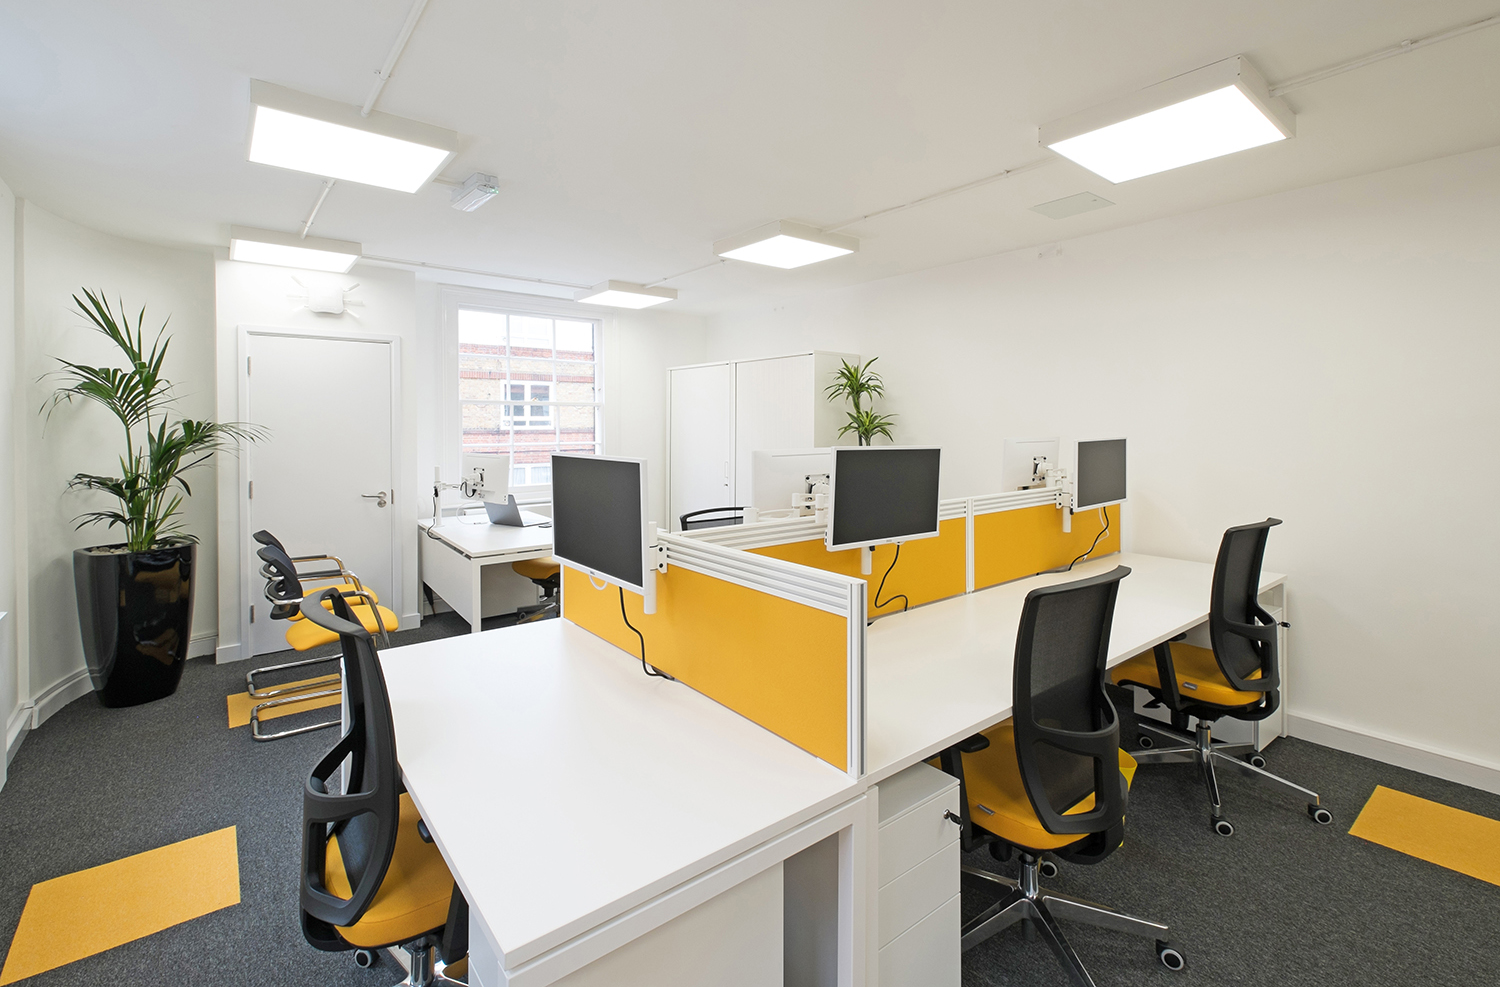 Best office colours for creativity and productivity - Duraflor